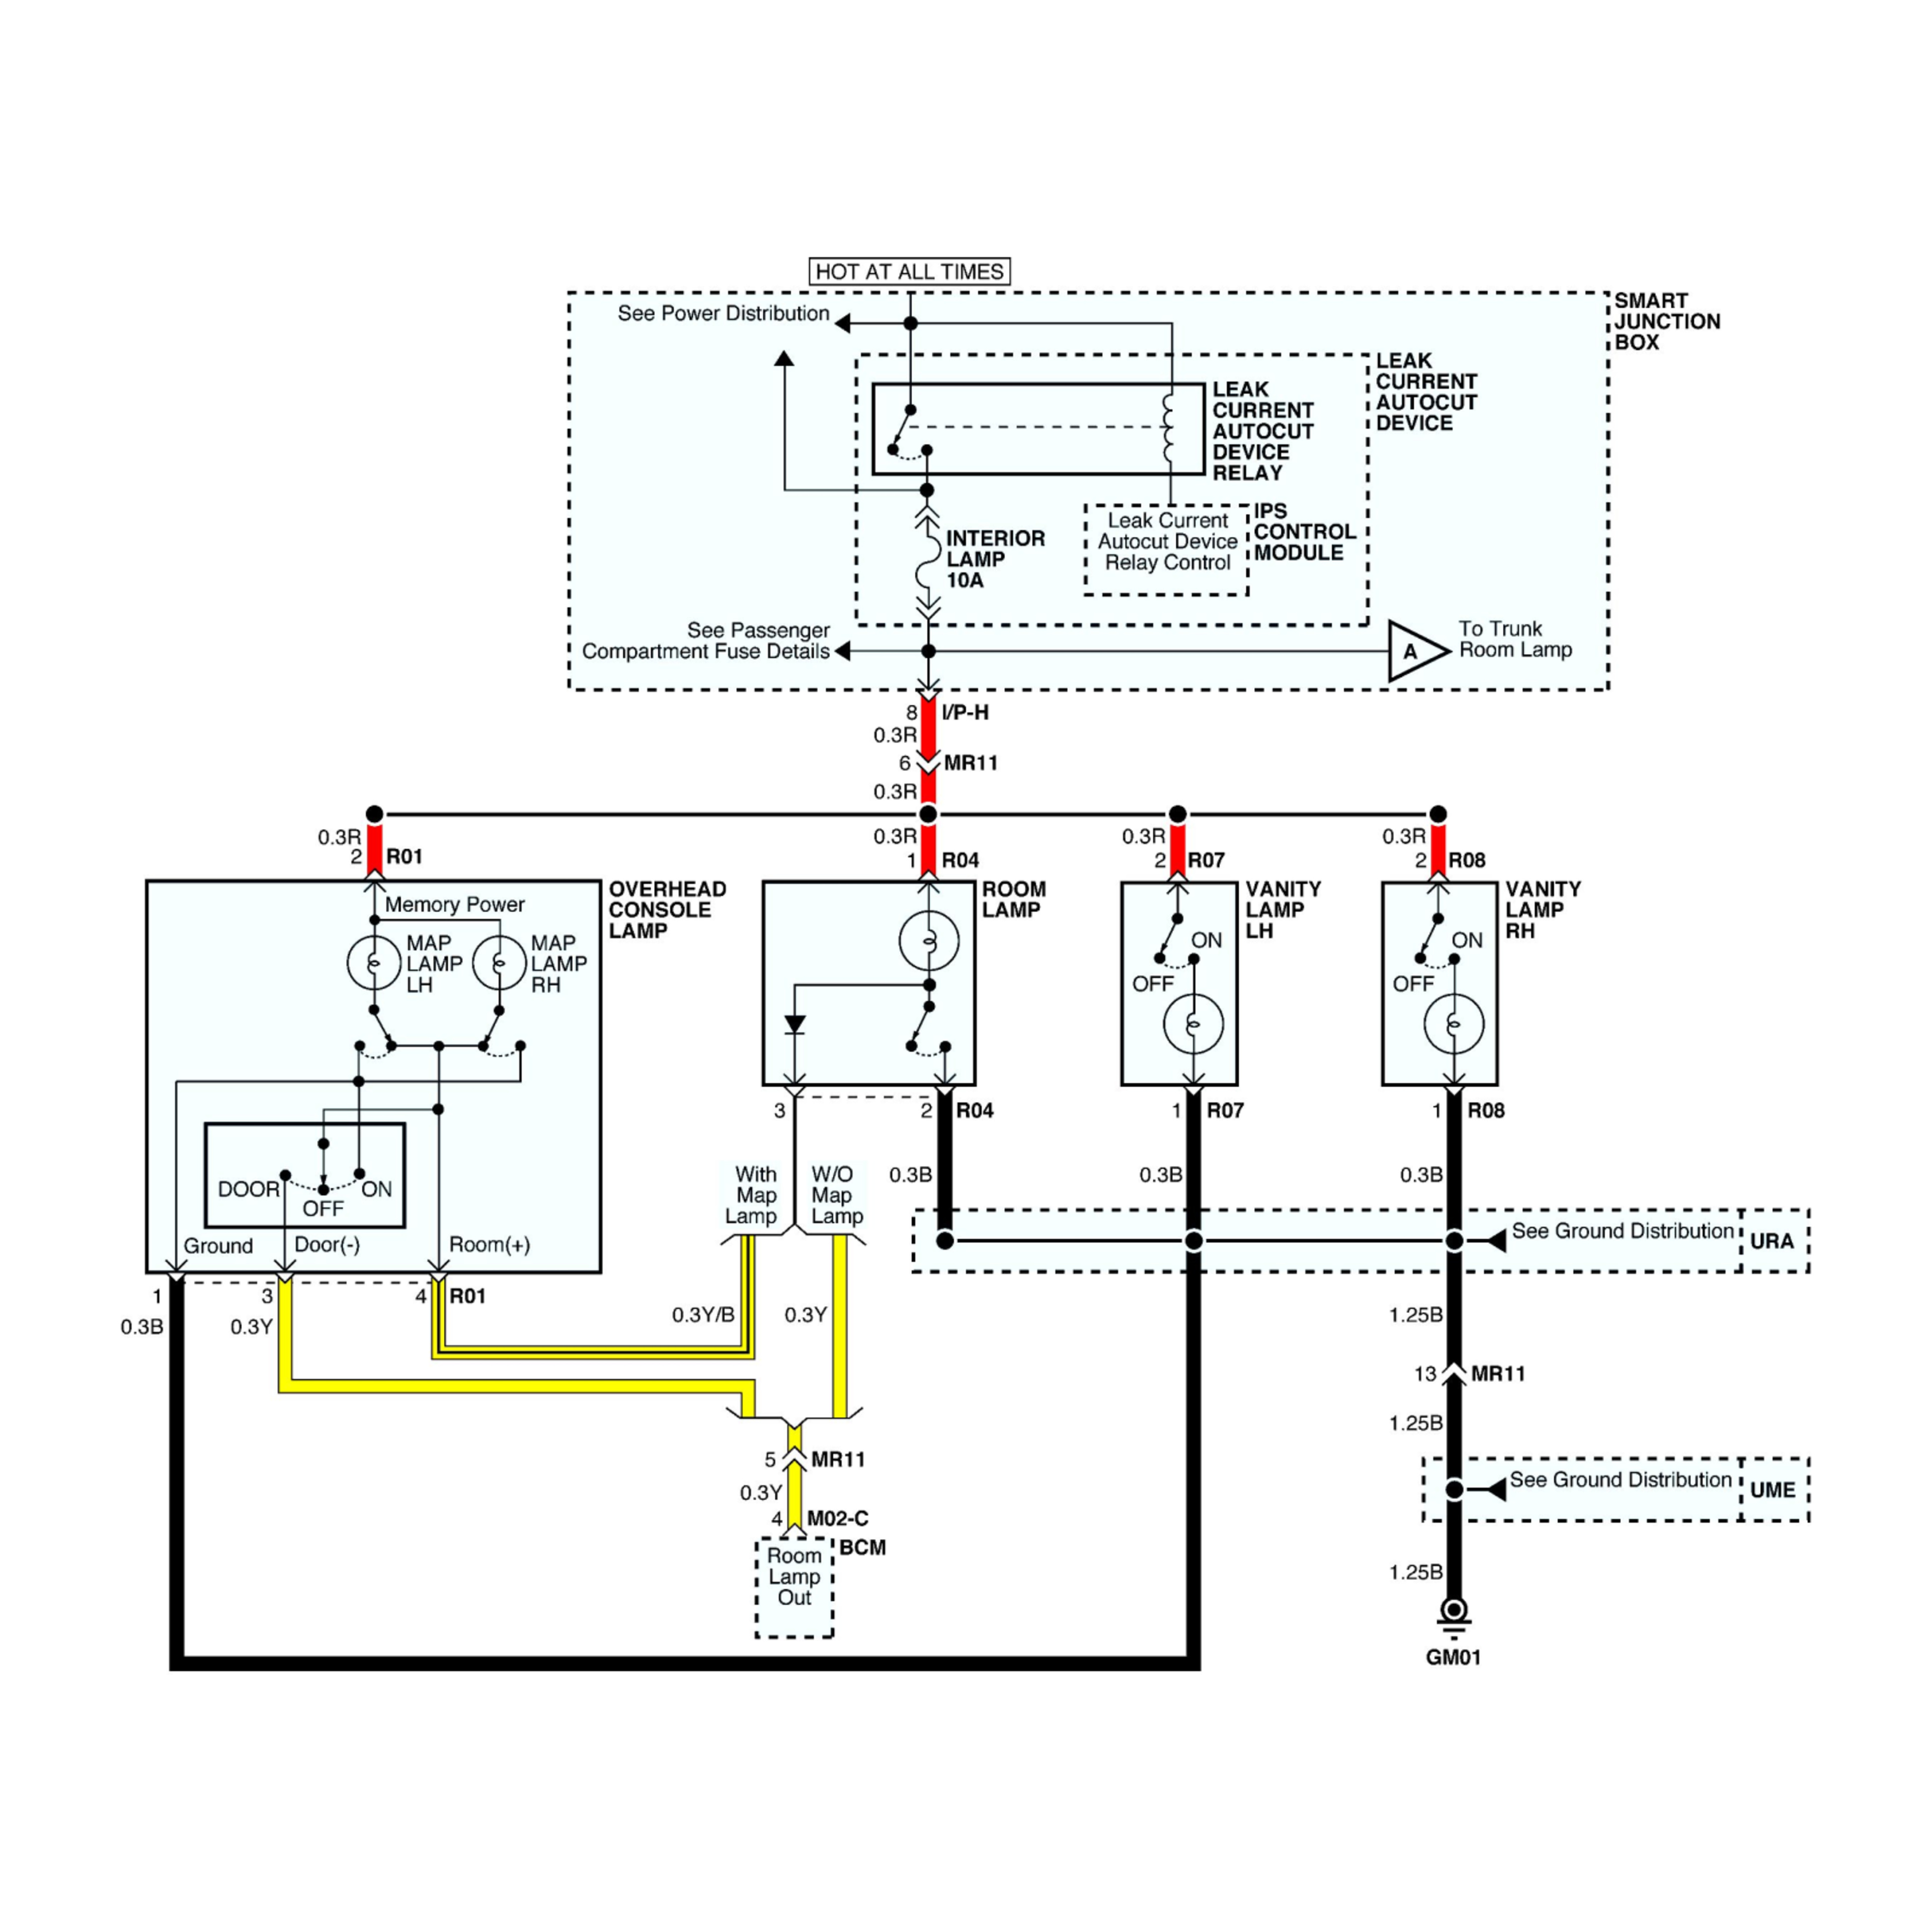 2008 Lincoln MKZ wiring diagrams example